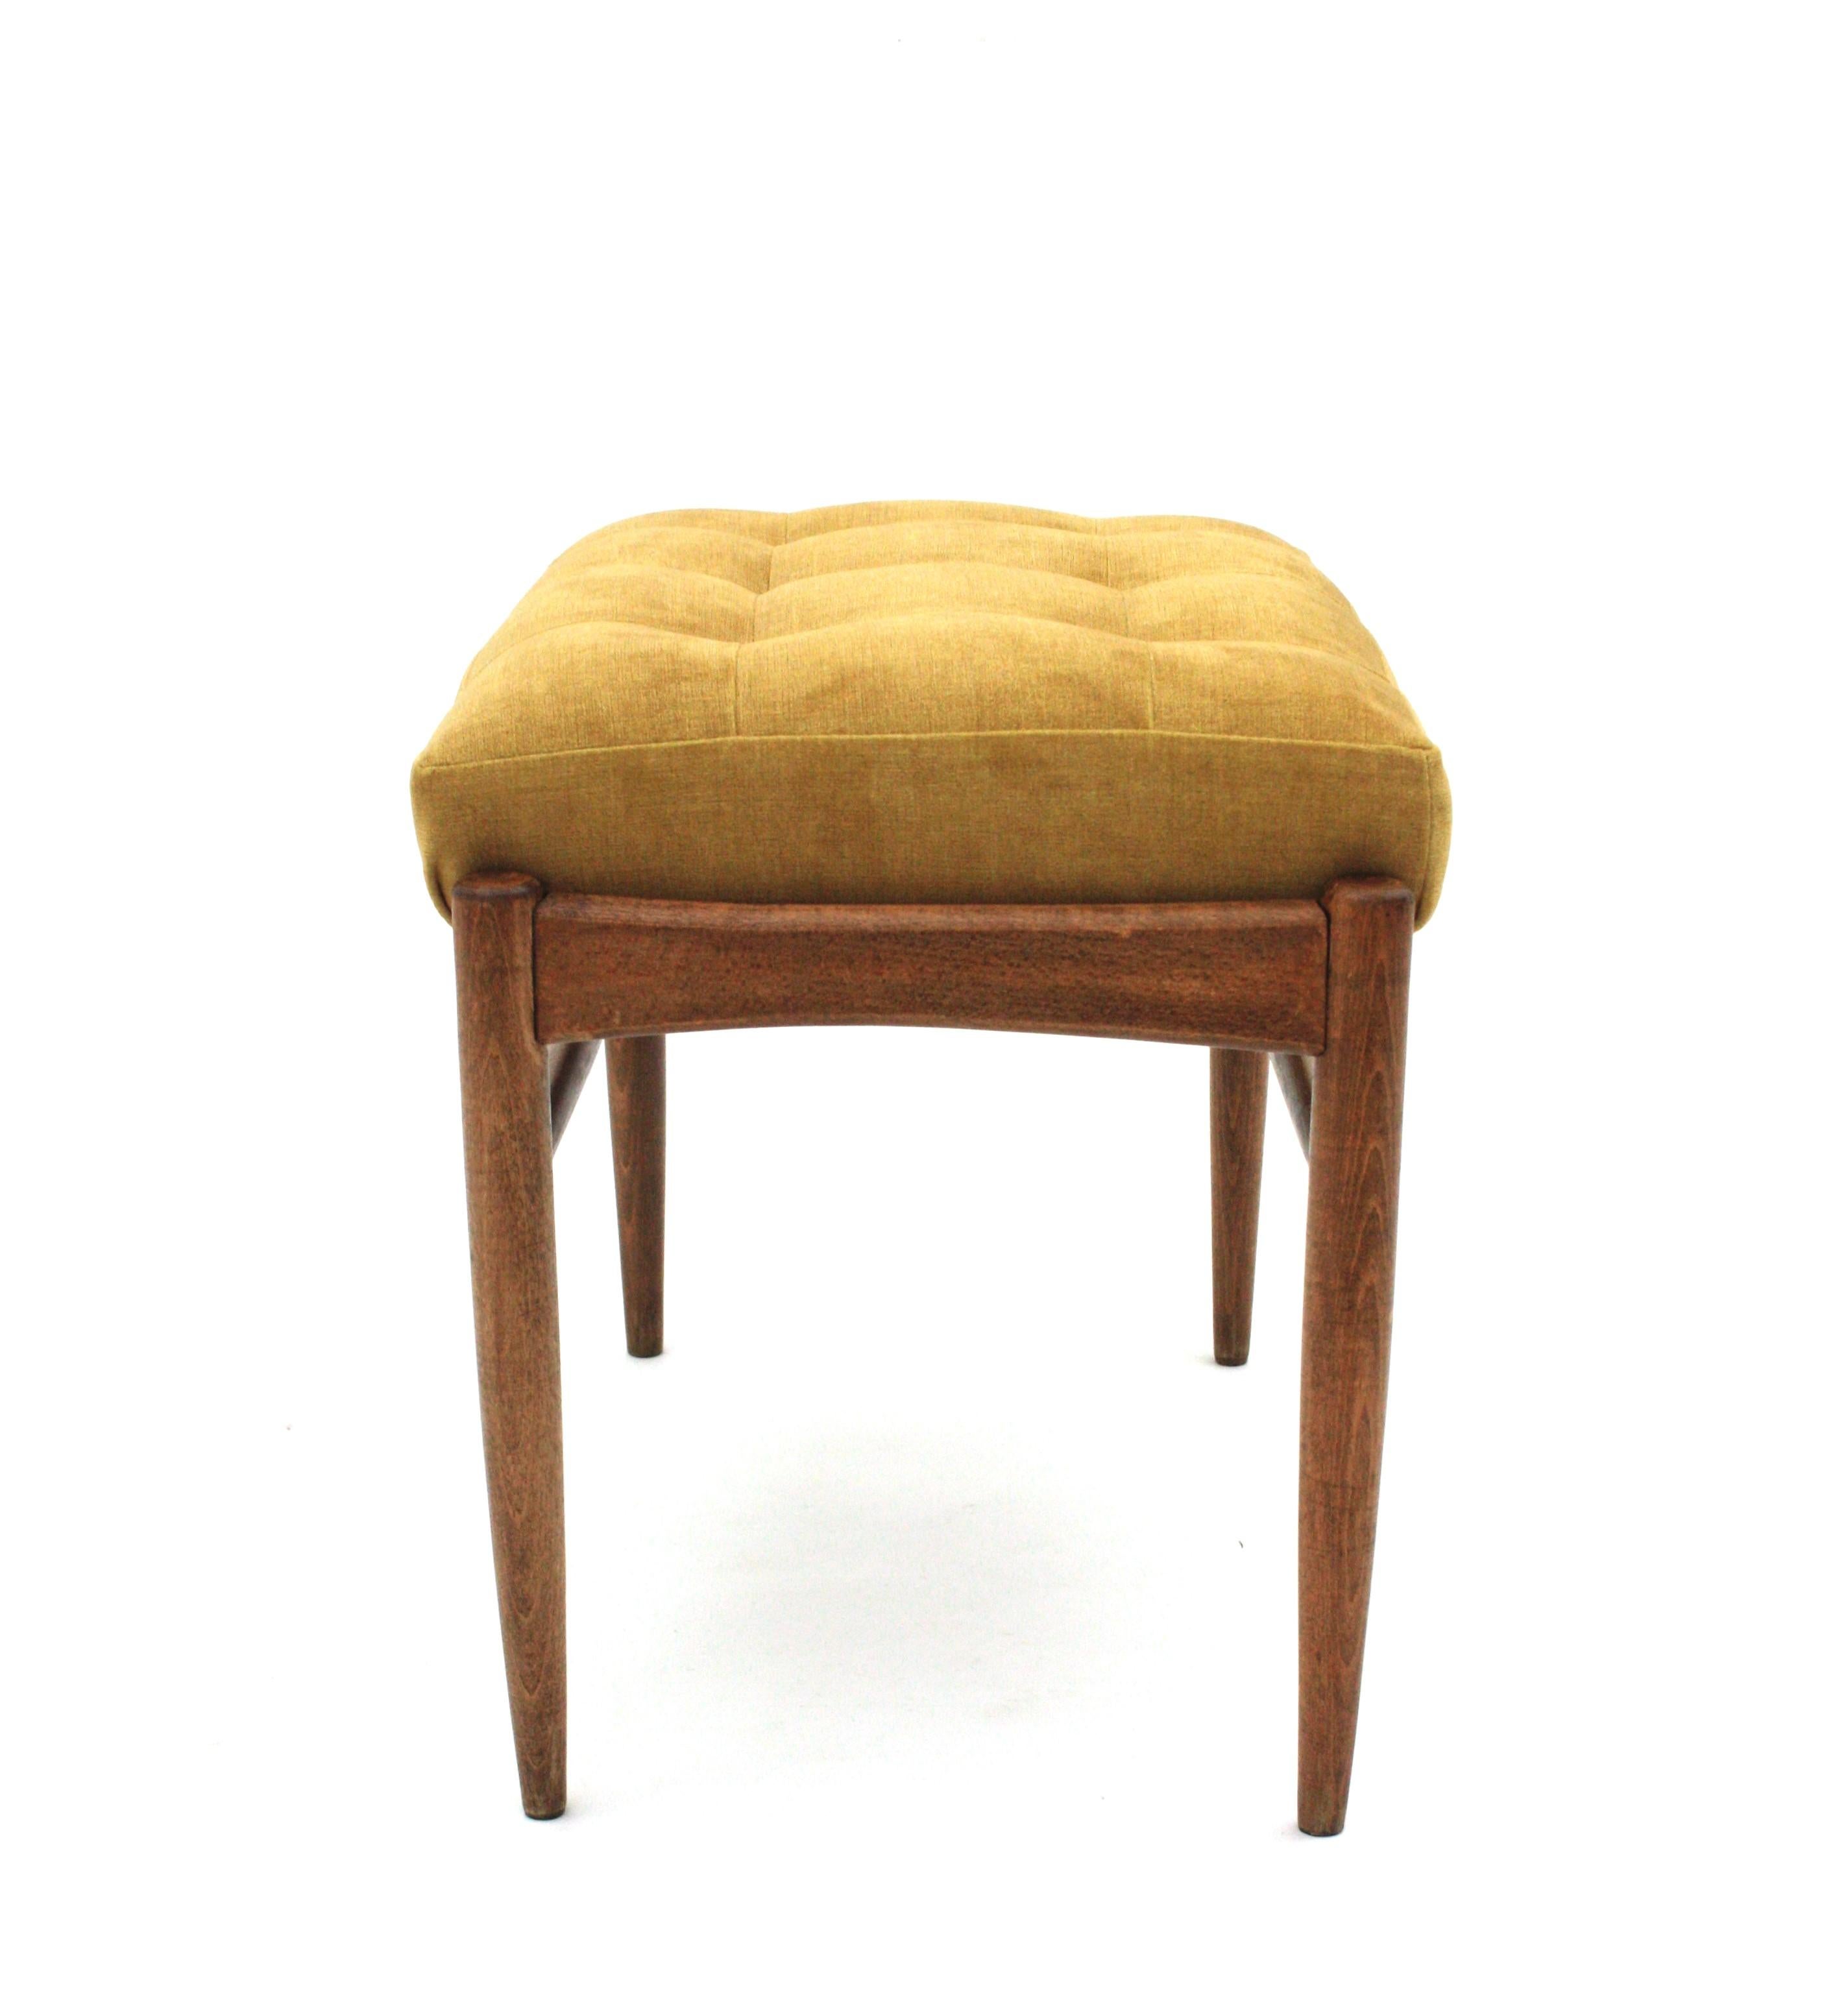 Spanish Scandinavian Modern Stool Ottoman or Bench New Upholstered in Yellow Chenille For Sale